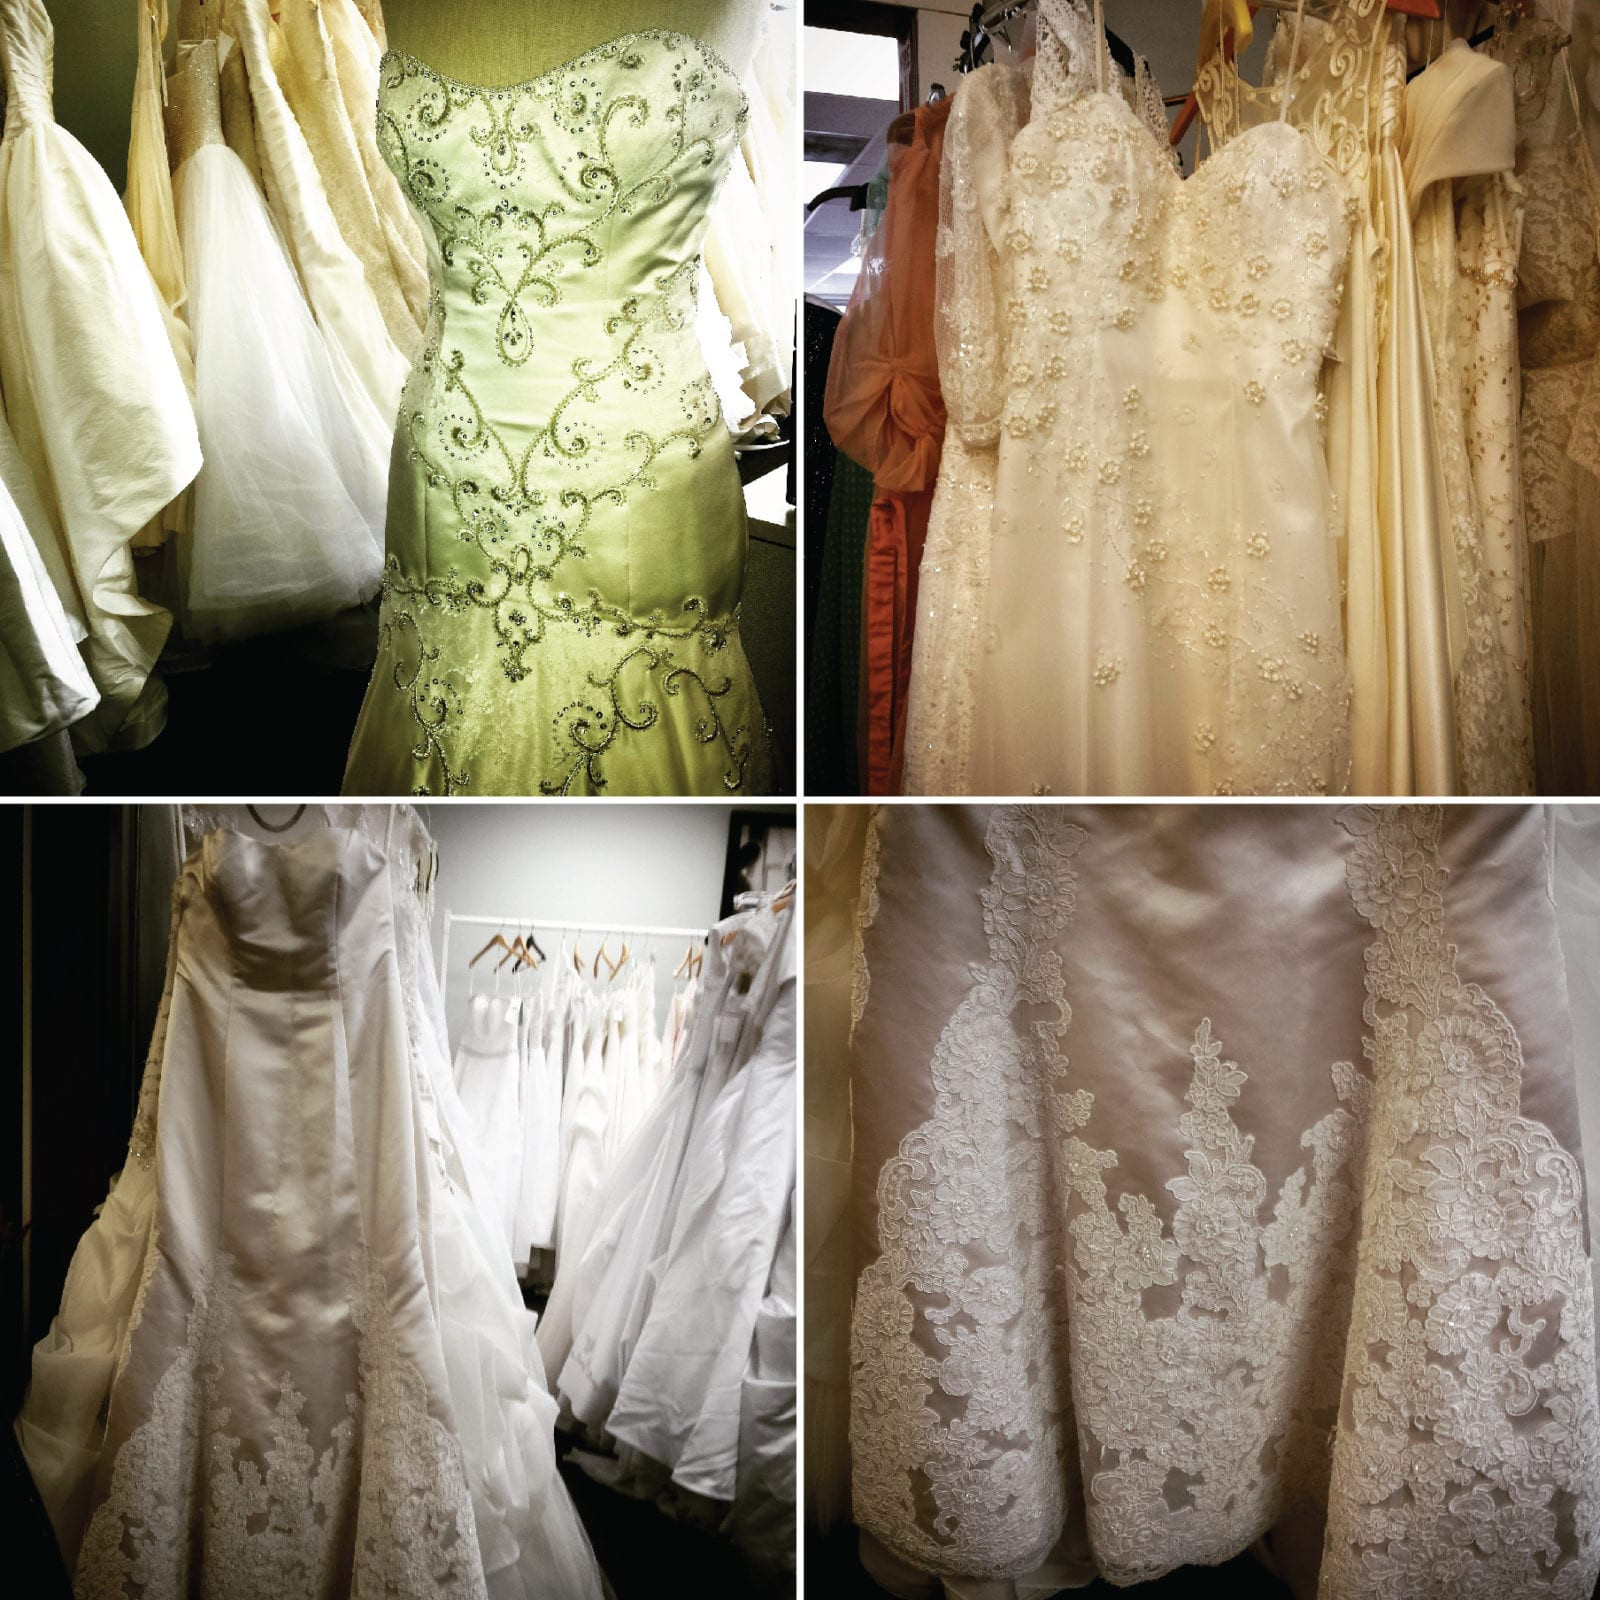 Wedding Dress Consignment Shops
 Bridal Shops in Bellingham Fit Every Style and Bud